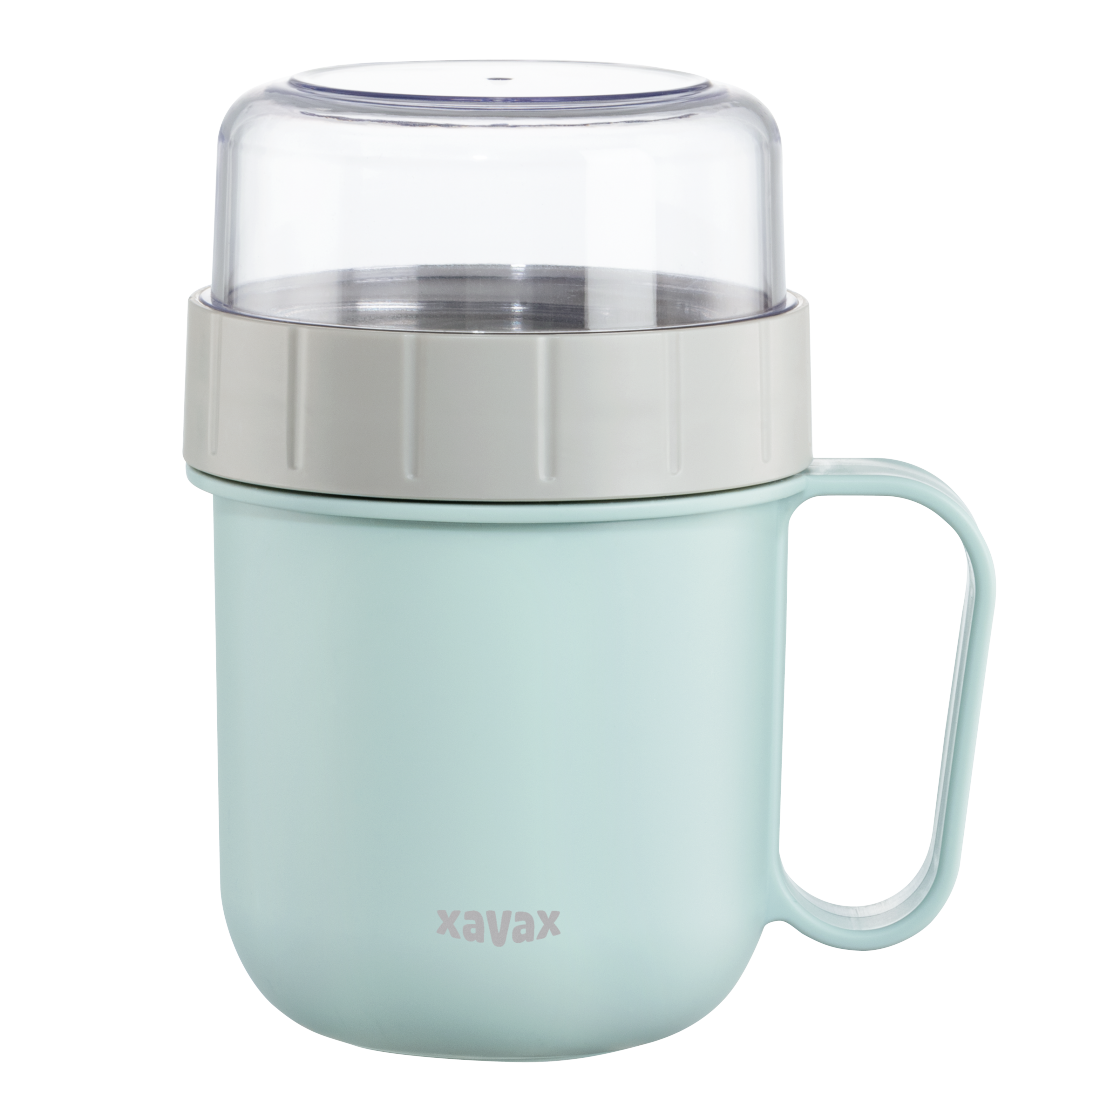 abx High-Res Image - Xavax, Cereal Mug To Go, with Topper, 2 Compartments, 500 + 200 ml, pastel blue/grey